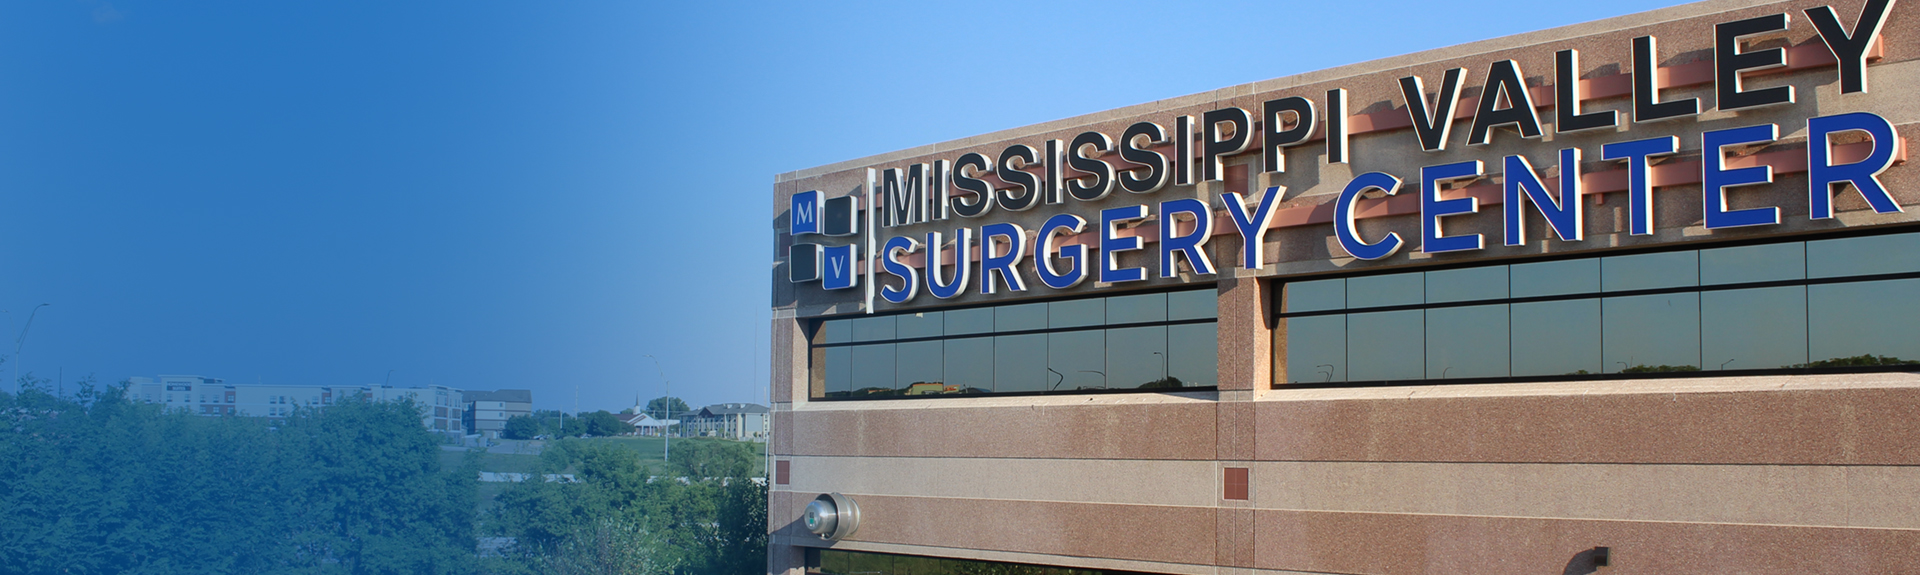 Mississippi Valley Surgery Center logo on building